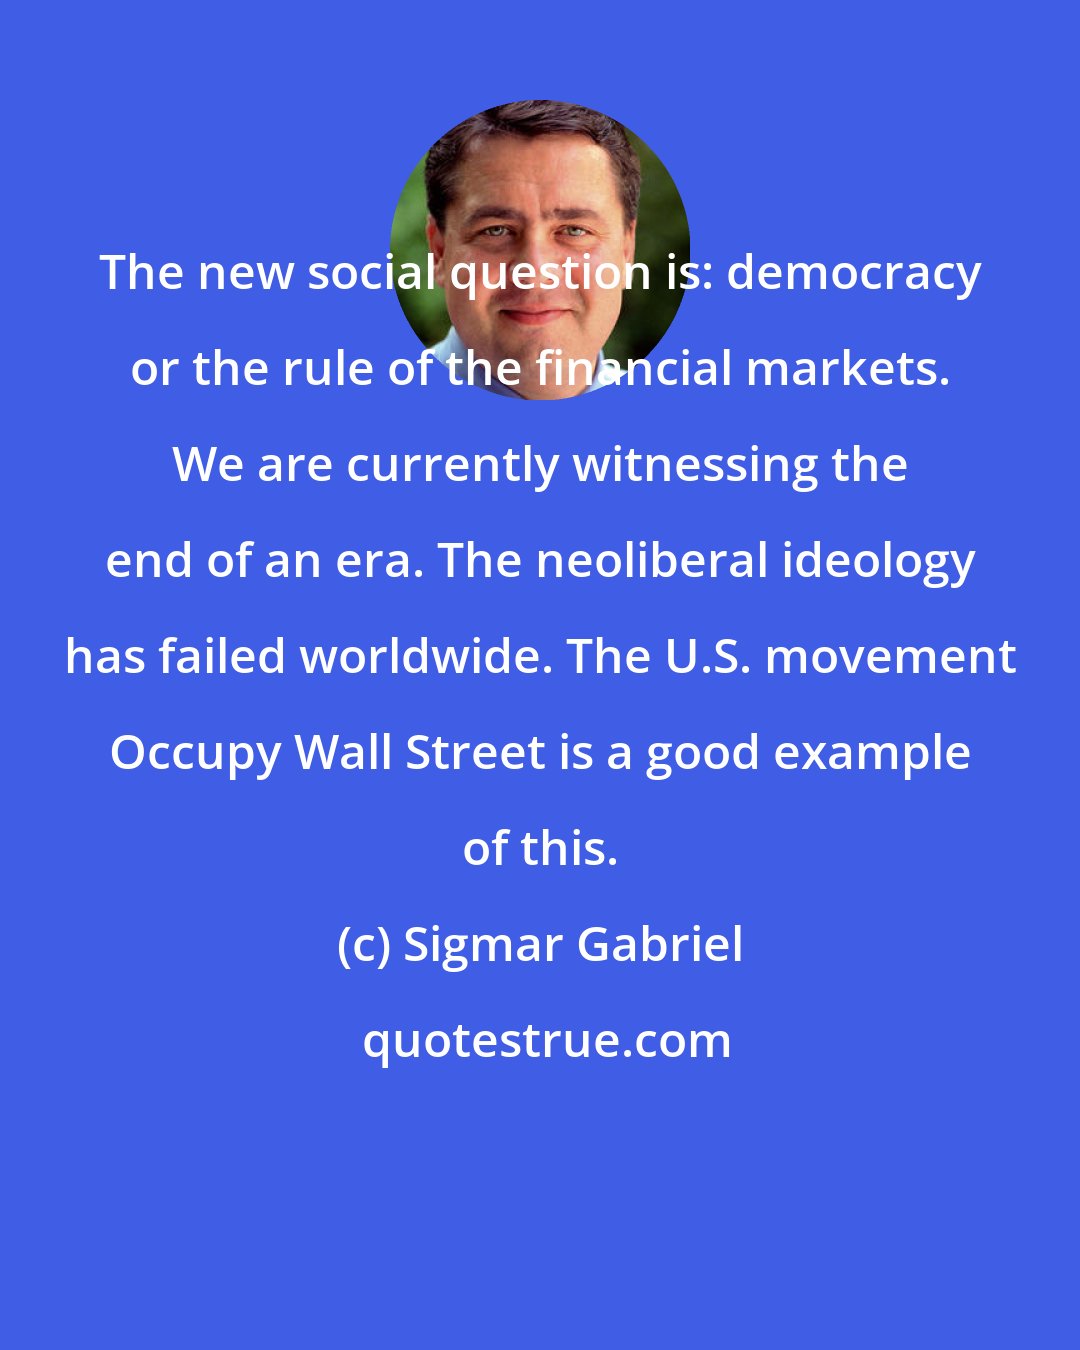 Sigmar Gabriel: The new social question is: democracy or the rule of the financial markets. We are currently witnessing the end of an era. The neoliberal ideology has failed worldwide. The U.S. movement Occupy Wall Street is a good example of this.